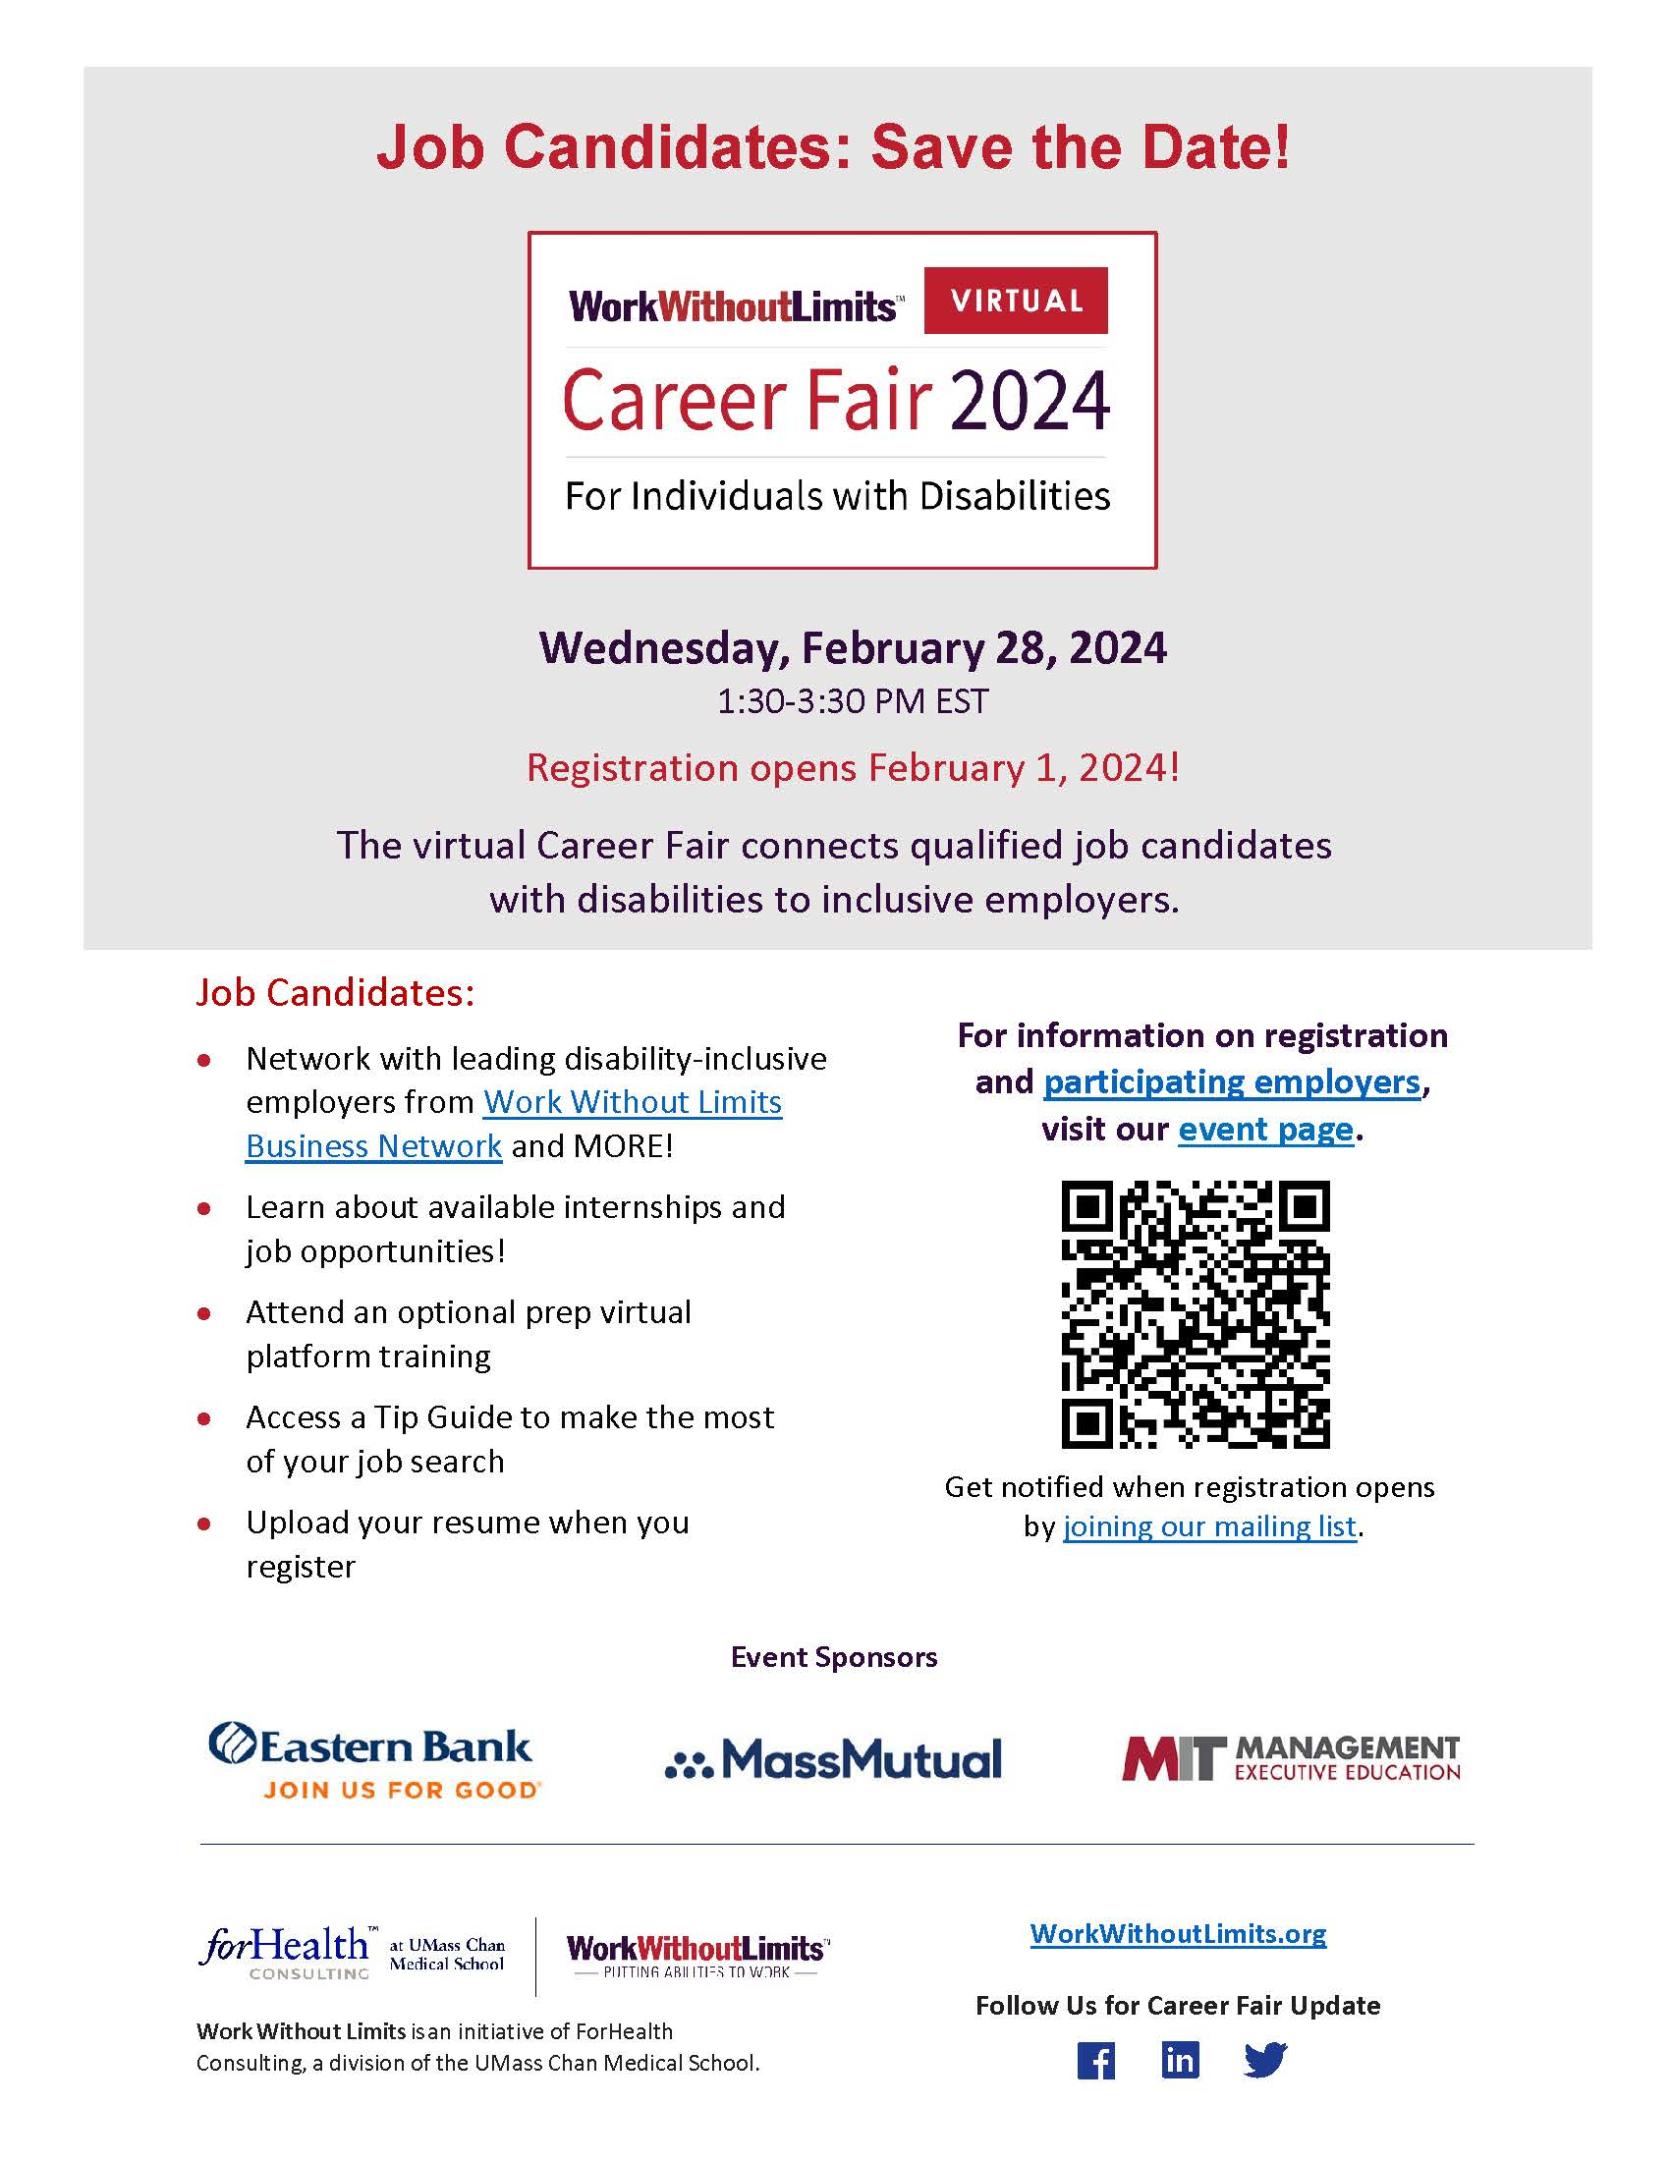 Job candidates register to attend the virtual career fair on February 28 flyer 